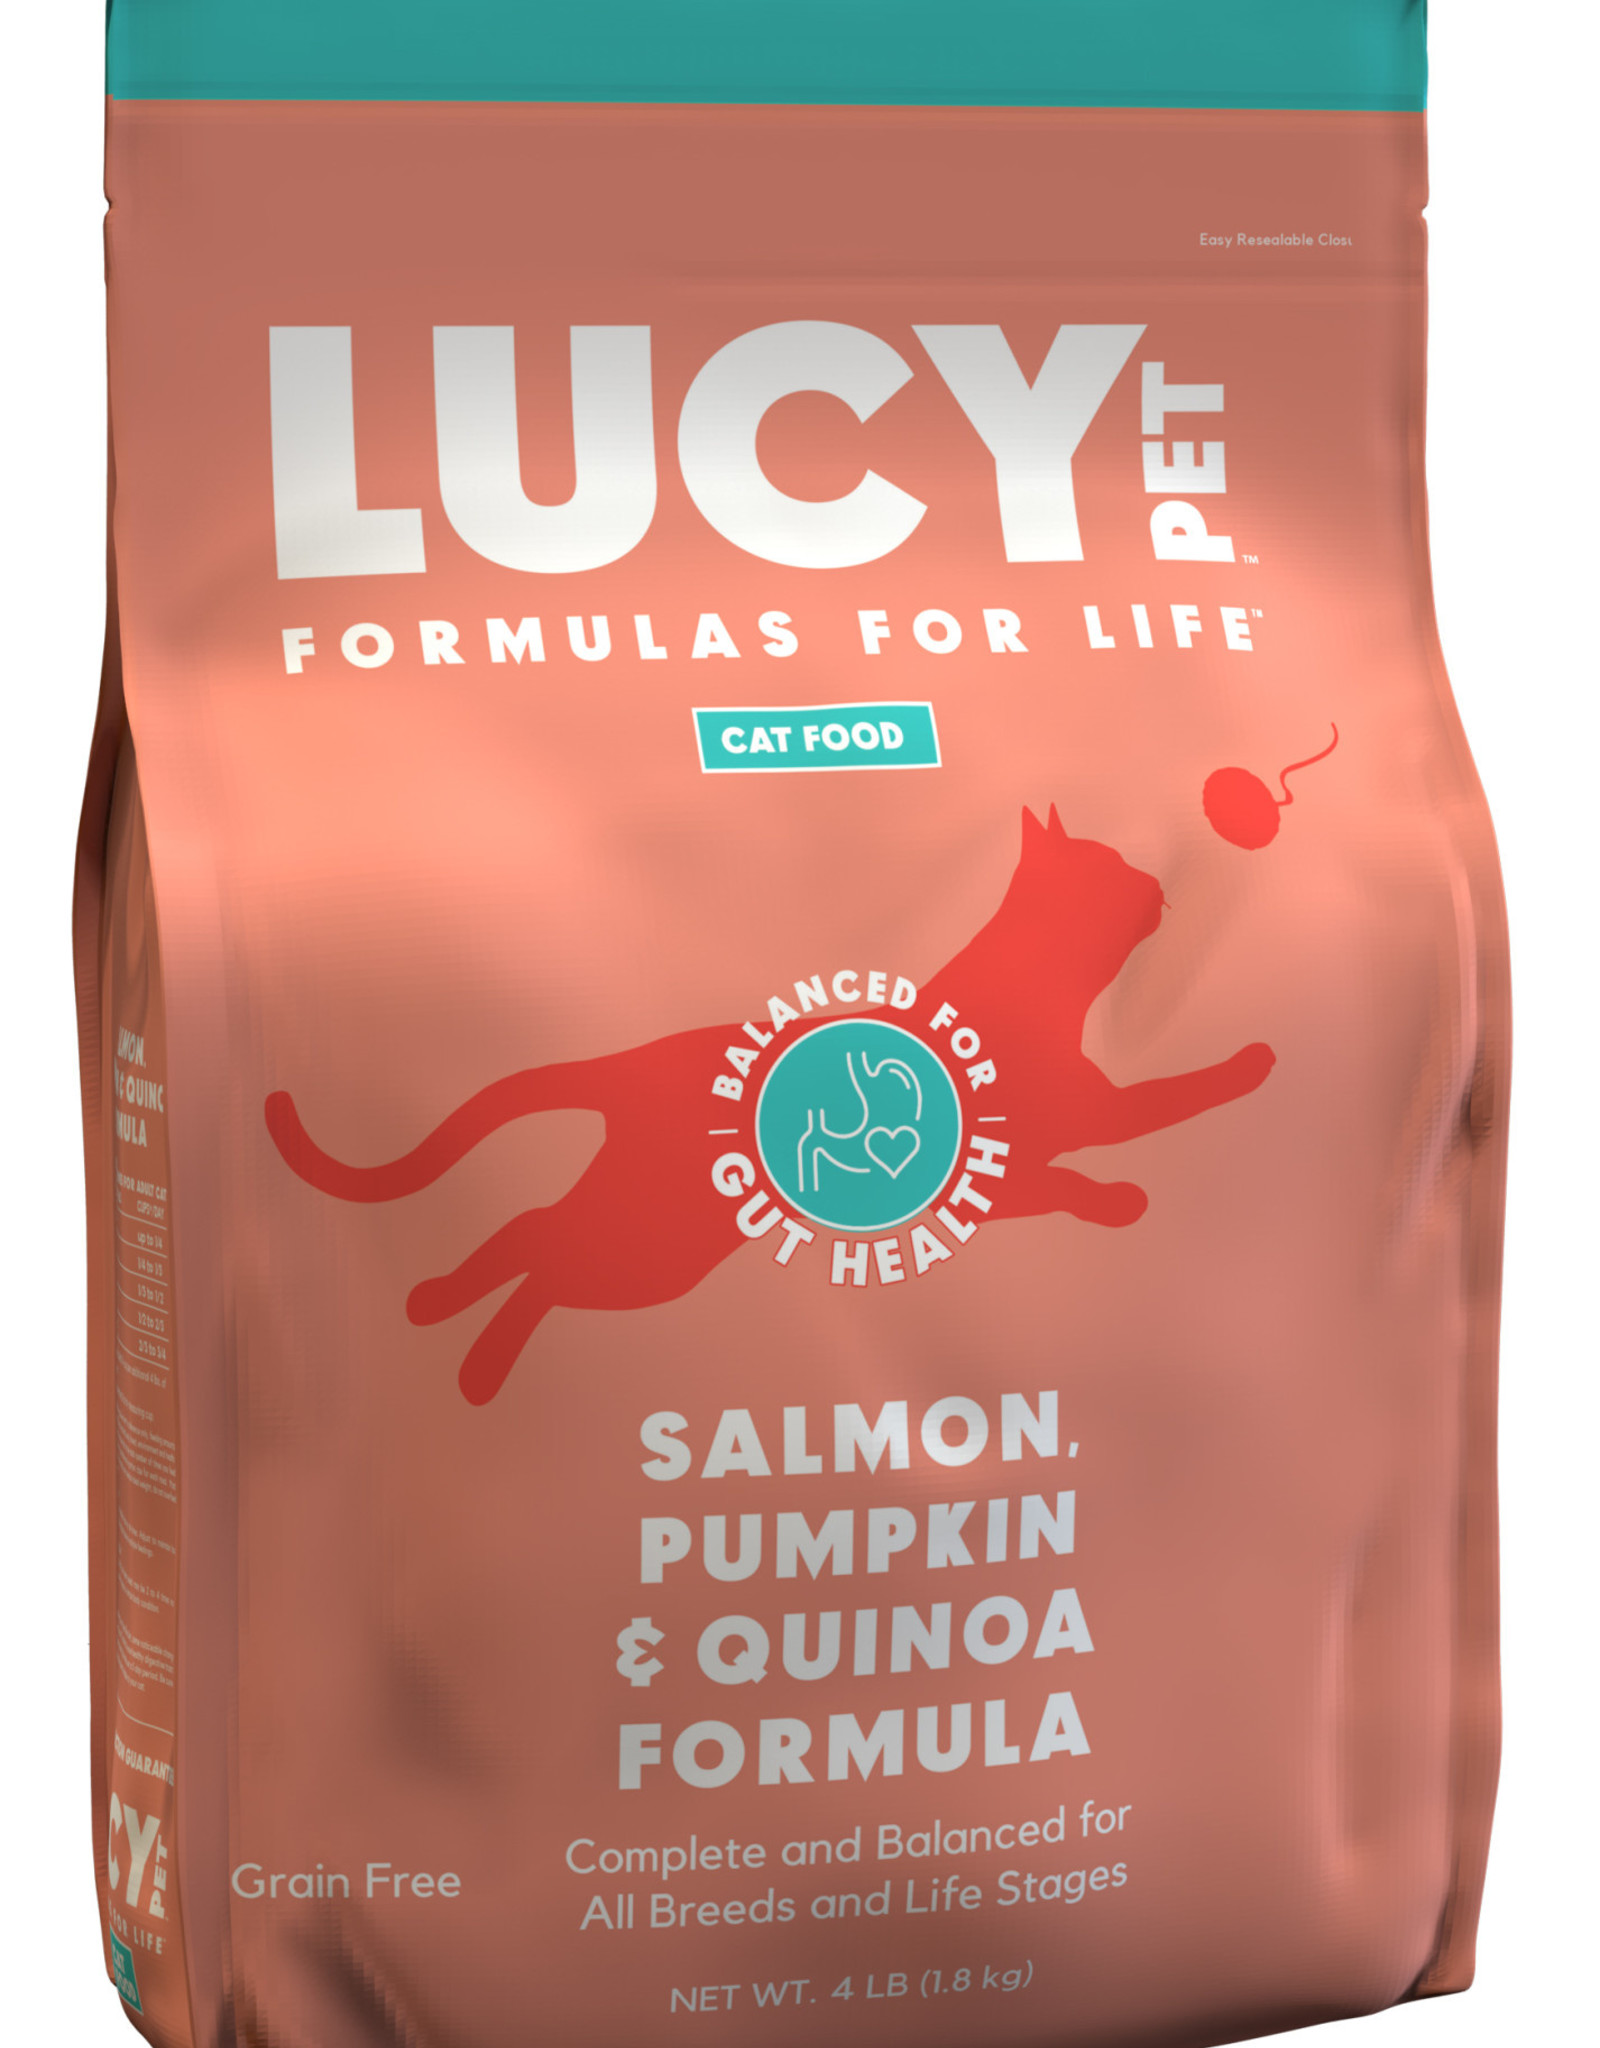 LUCY PET PRODUCTS Lucy Pet Formulas for Life ™ Salmon, Pumpkin and Quinoa Cat